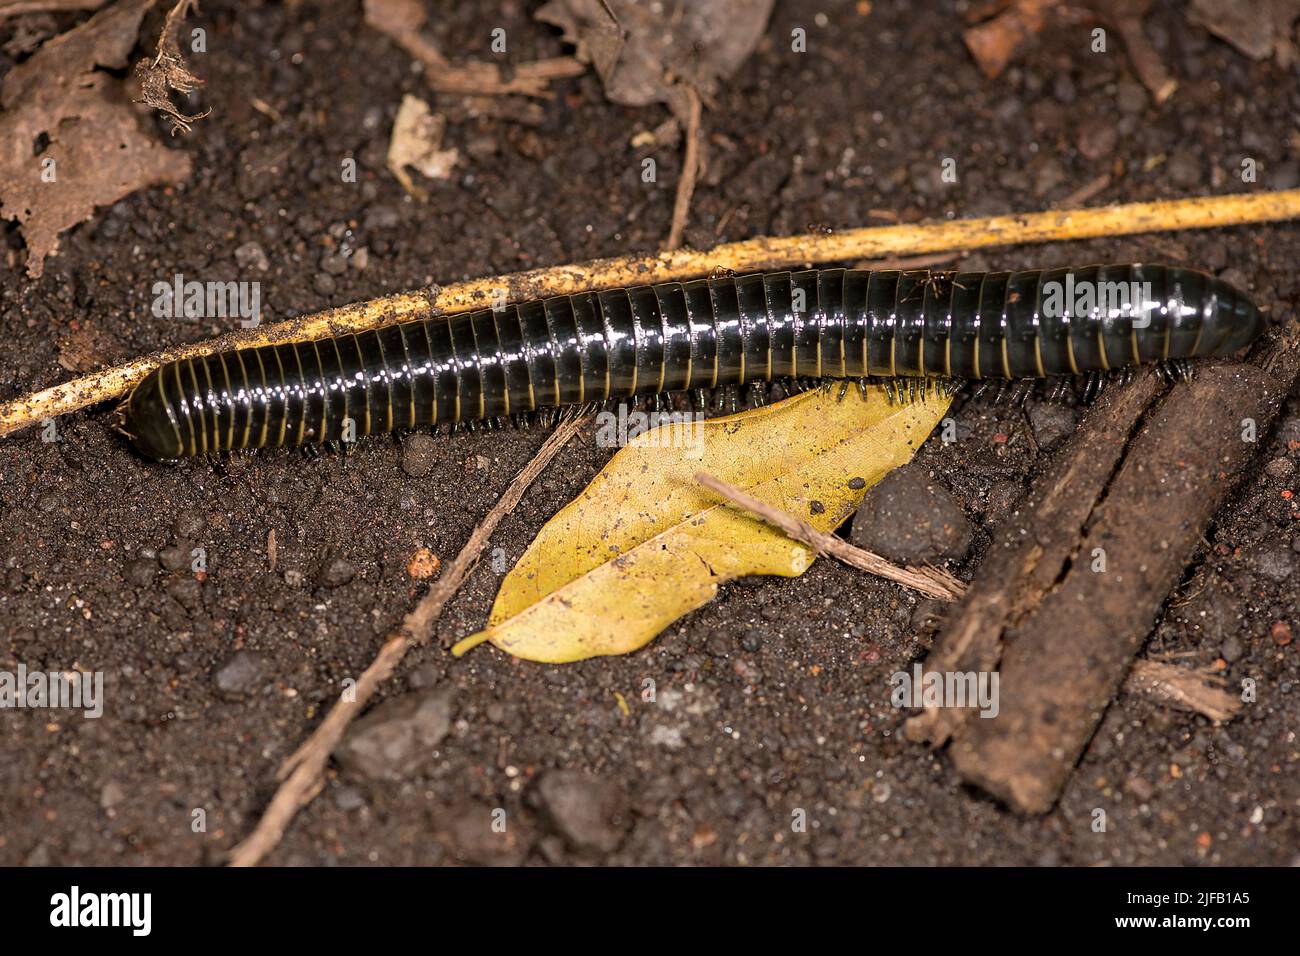 Giant millipede from the order Spirobolida photographed in Tangkoko National Park, northern Sulawesi, Indonesia Stock Photo